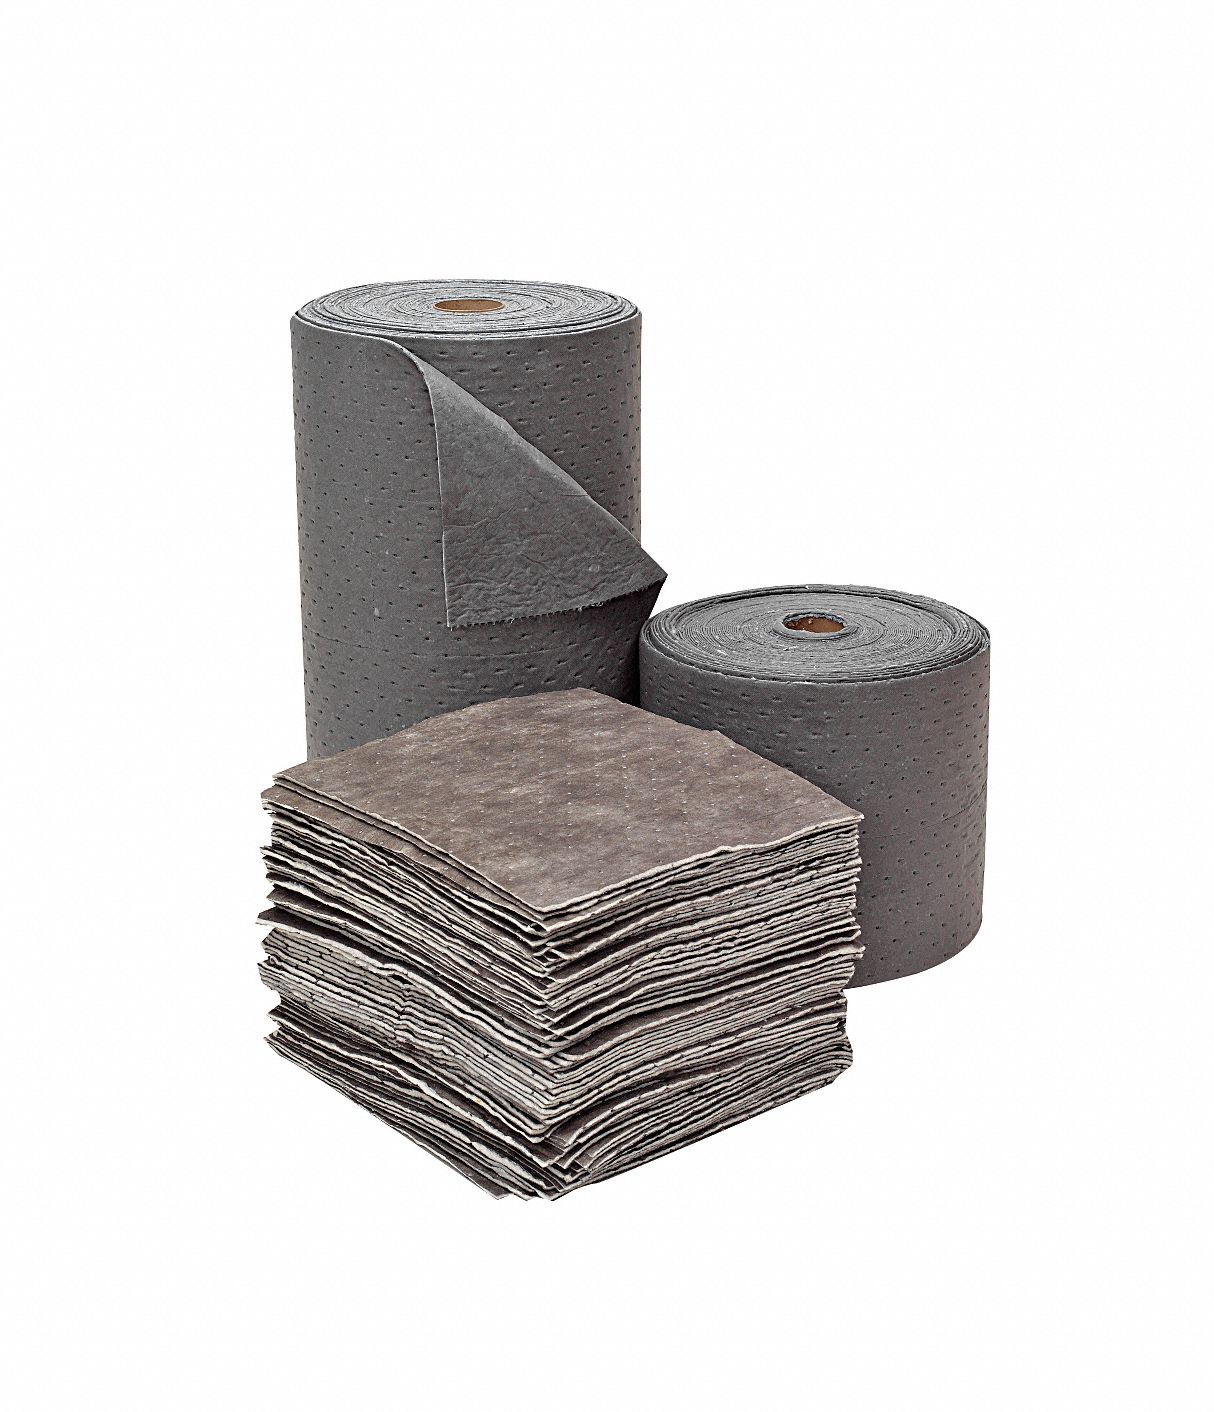 Heavy, Polypropylene/Synthetic Fibers/Natural Fibers Absorbent Roll, Fluids Absorbed: Universal / Ma